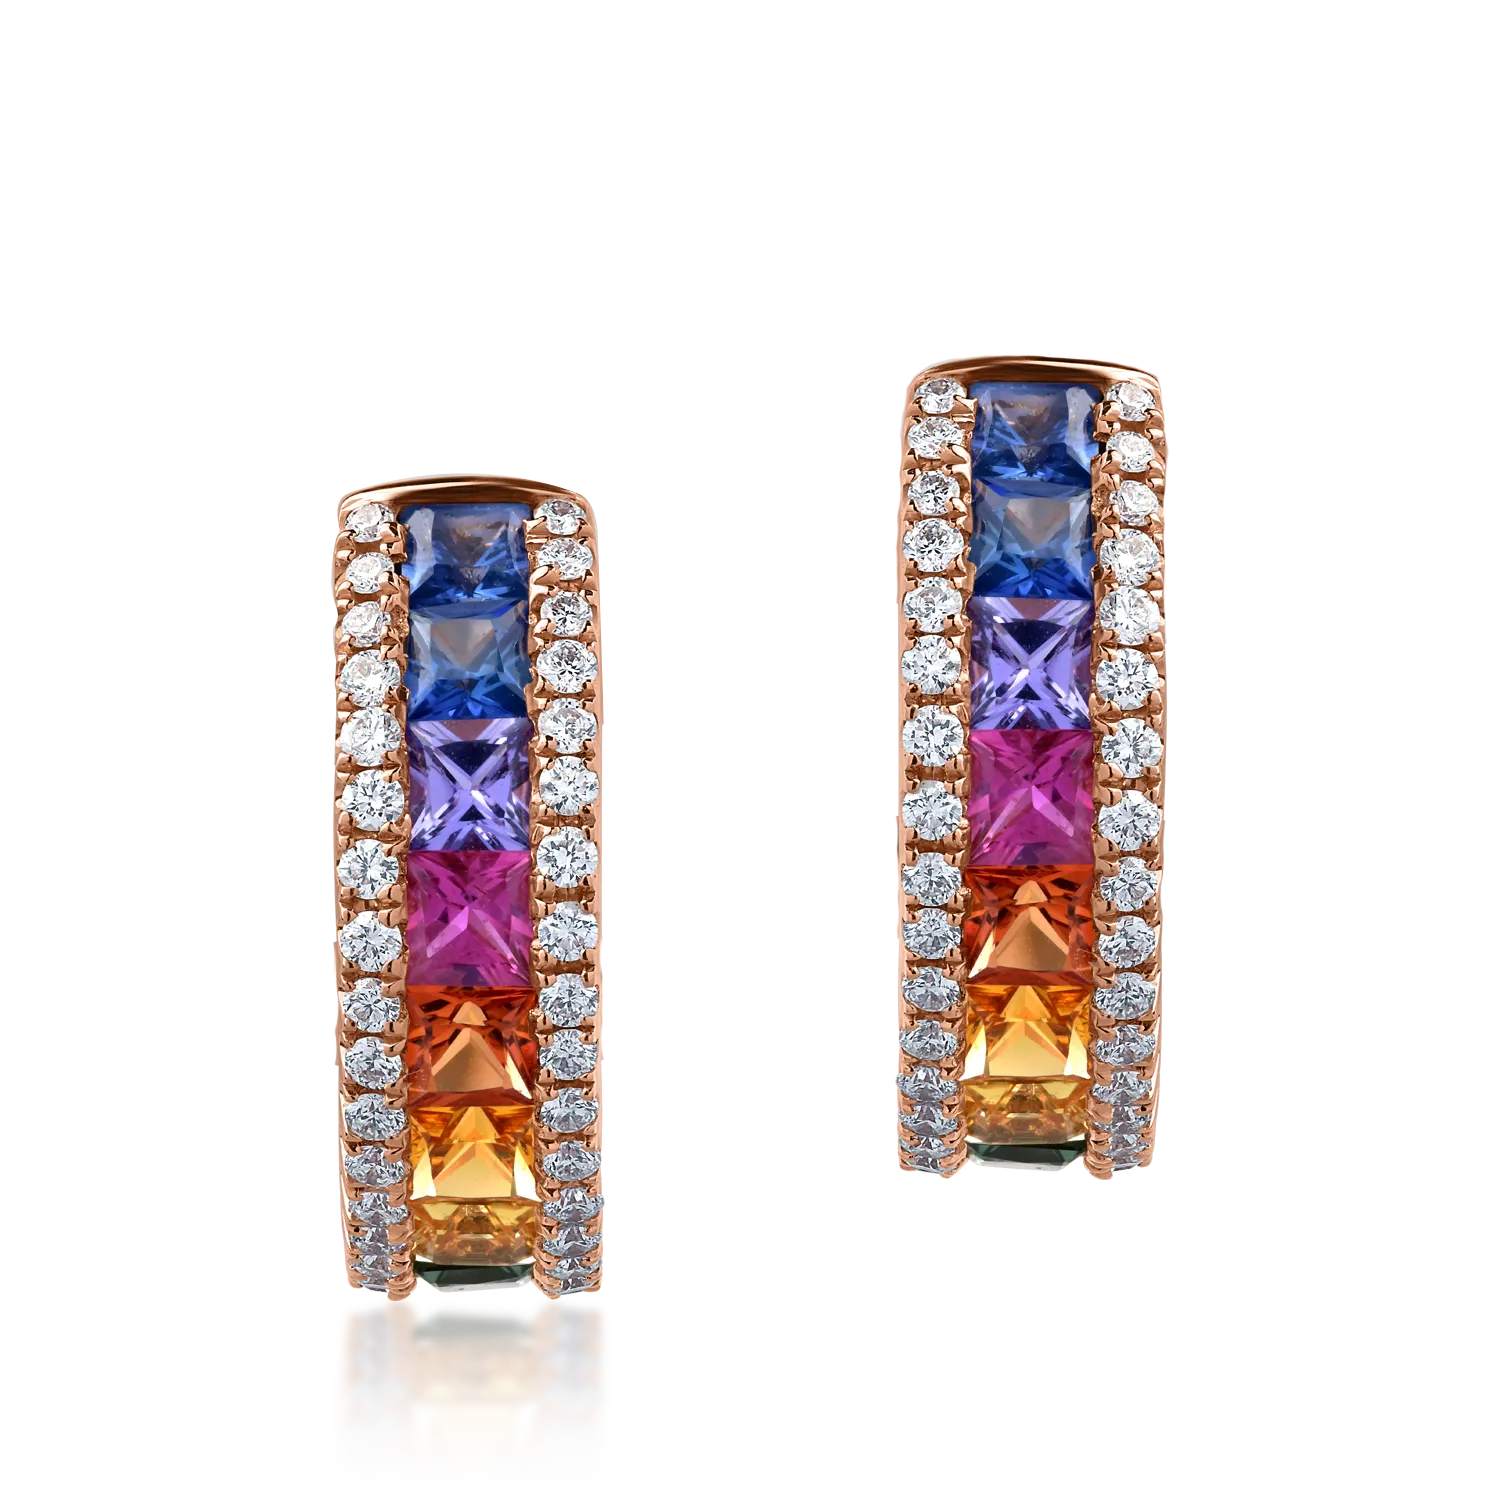 18K rose gold earrings with 1.72ct multicolored sapphires and 0.34ct diamonds